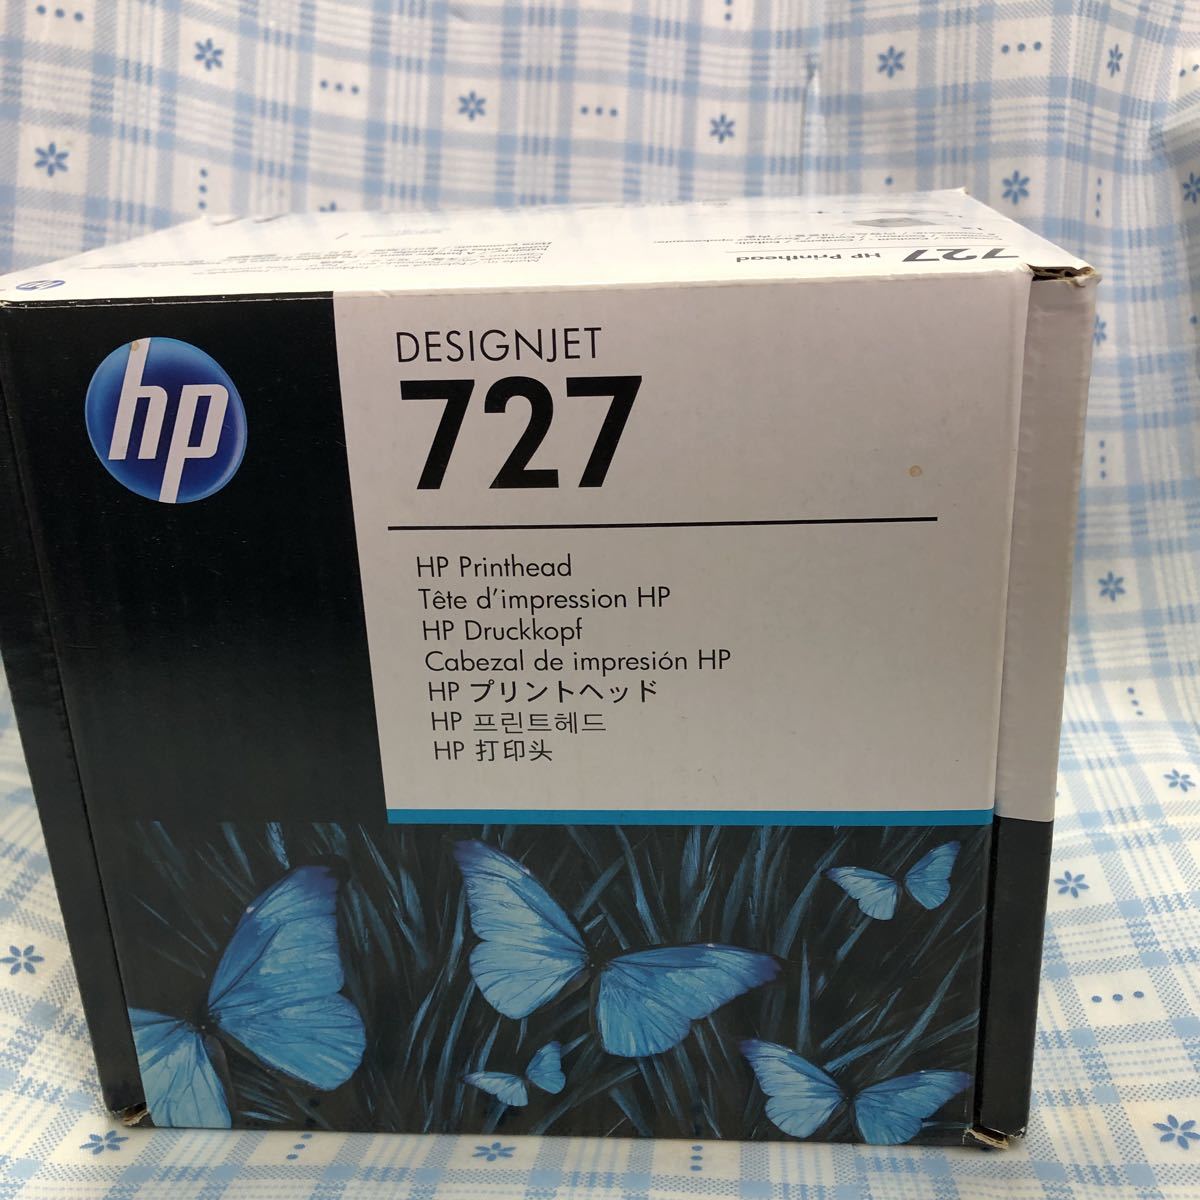  special price prompt decision HP 727 print head hyu- let * paker do large size printer new goods 